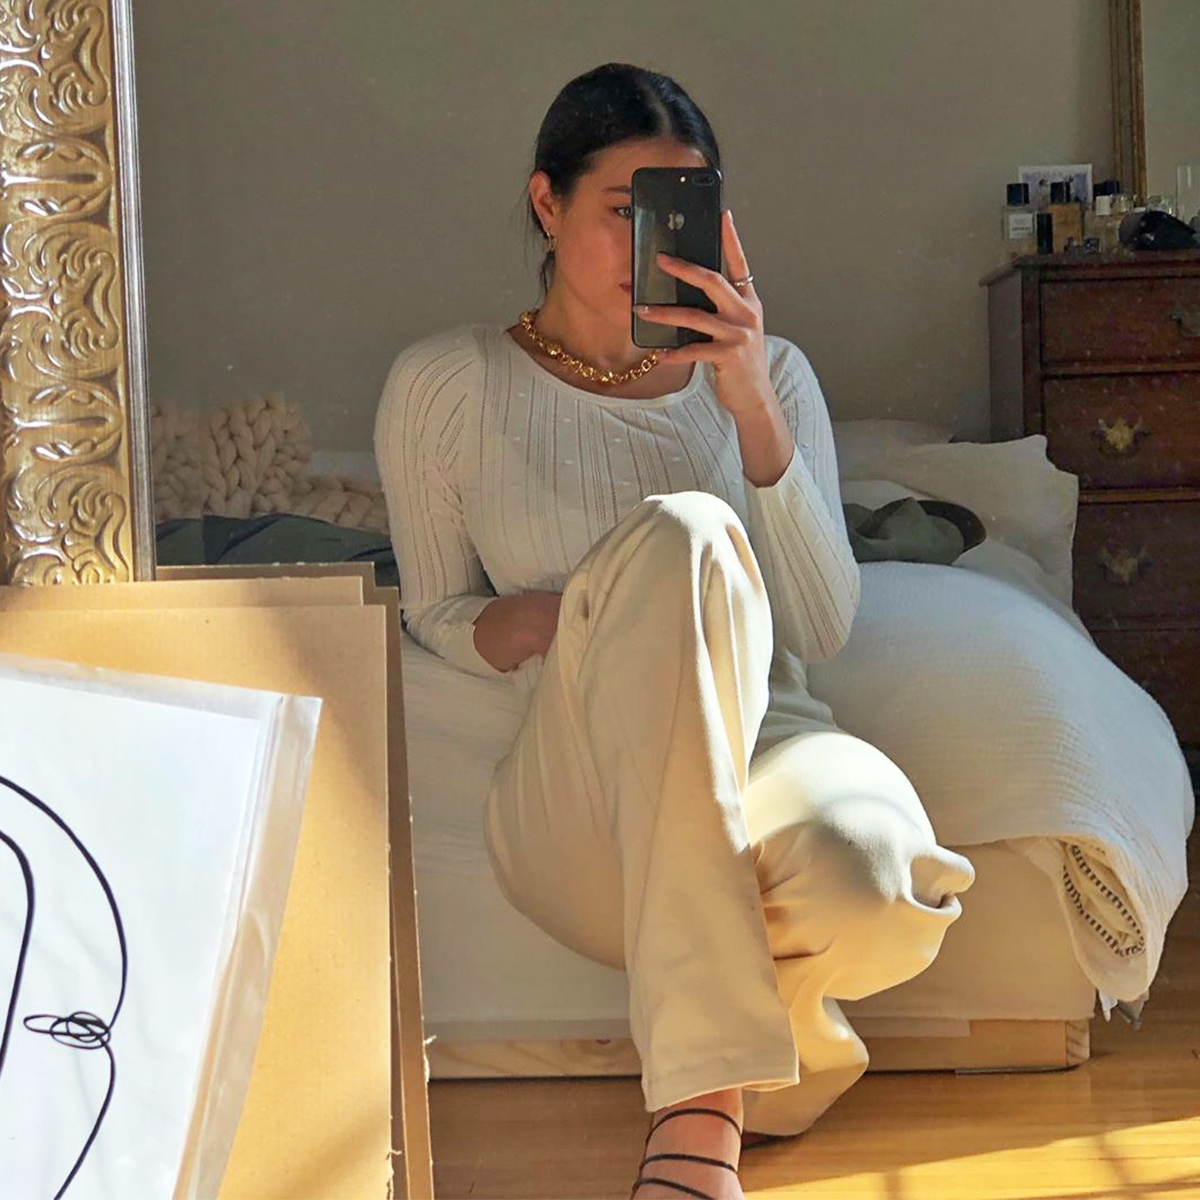 29 Cheap Accessories to Dress Up Work-From-Home Outfits